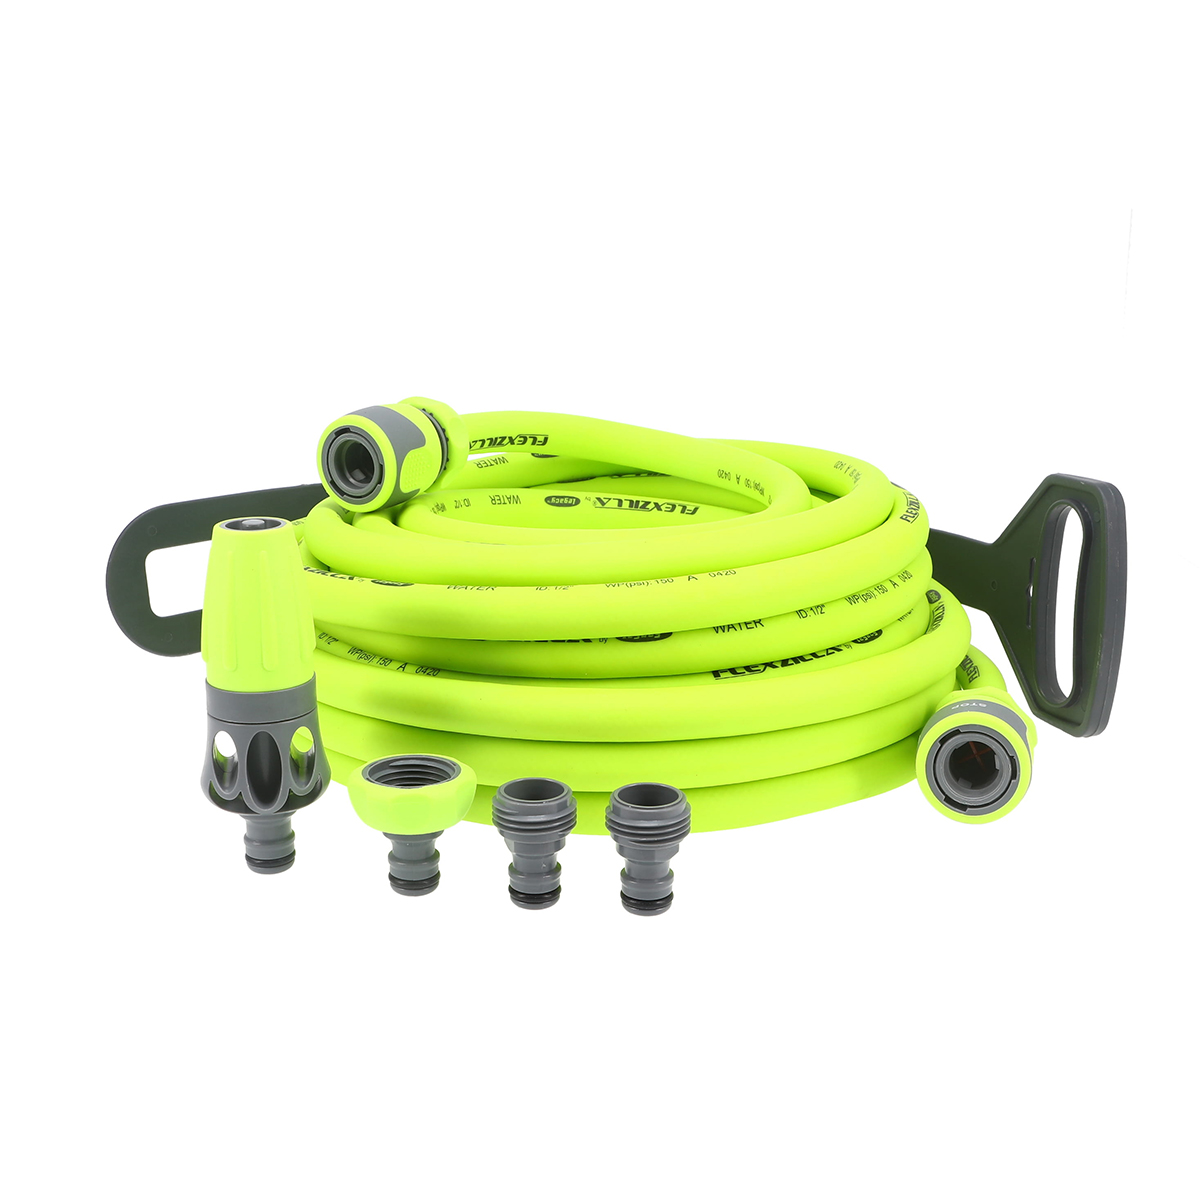 Flexzilla® Garden Hose Kit with Quick Connect Attachments, 1/2 x 50',  ZillaGreen, Hybrid Polymer 